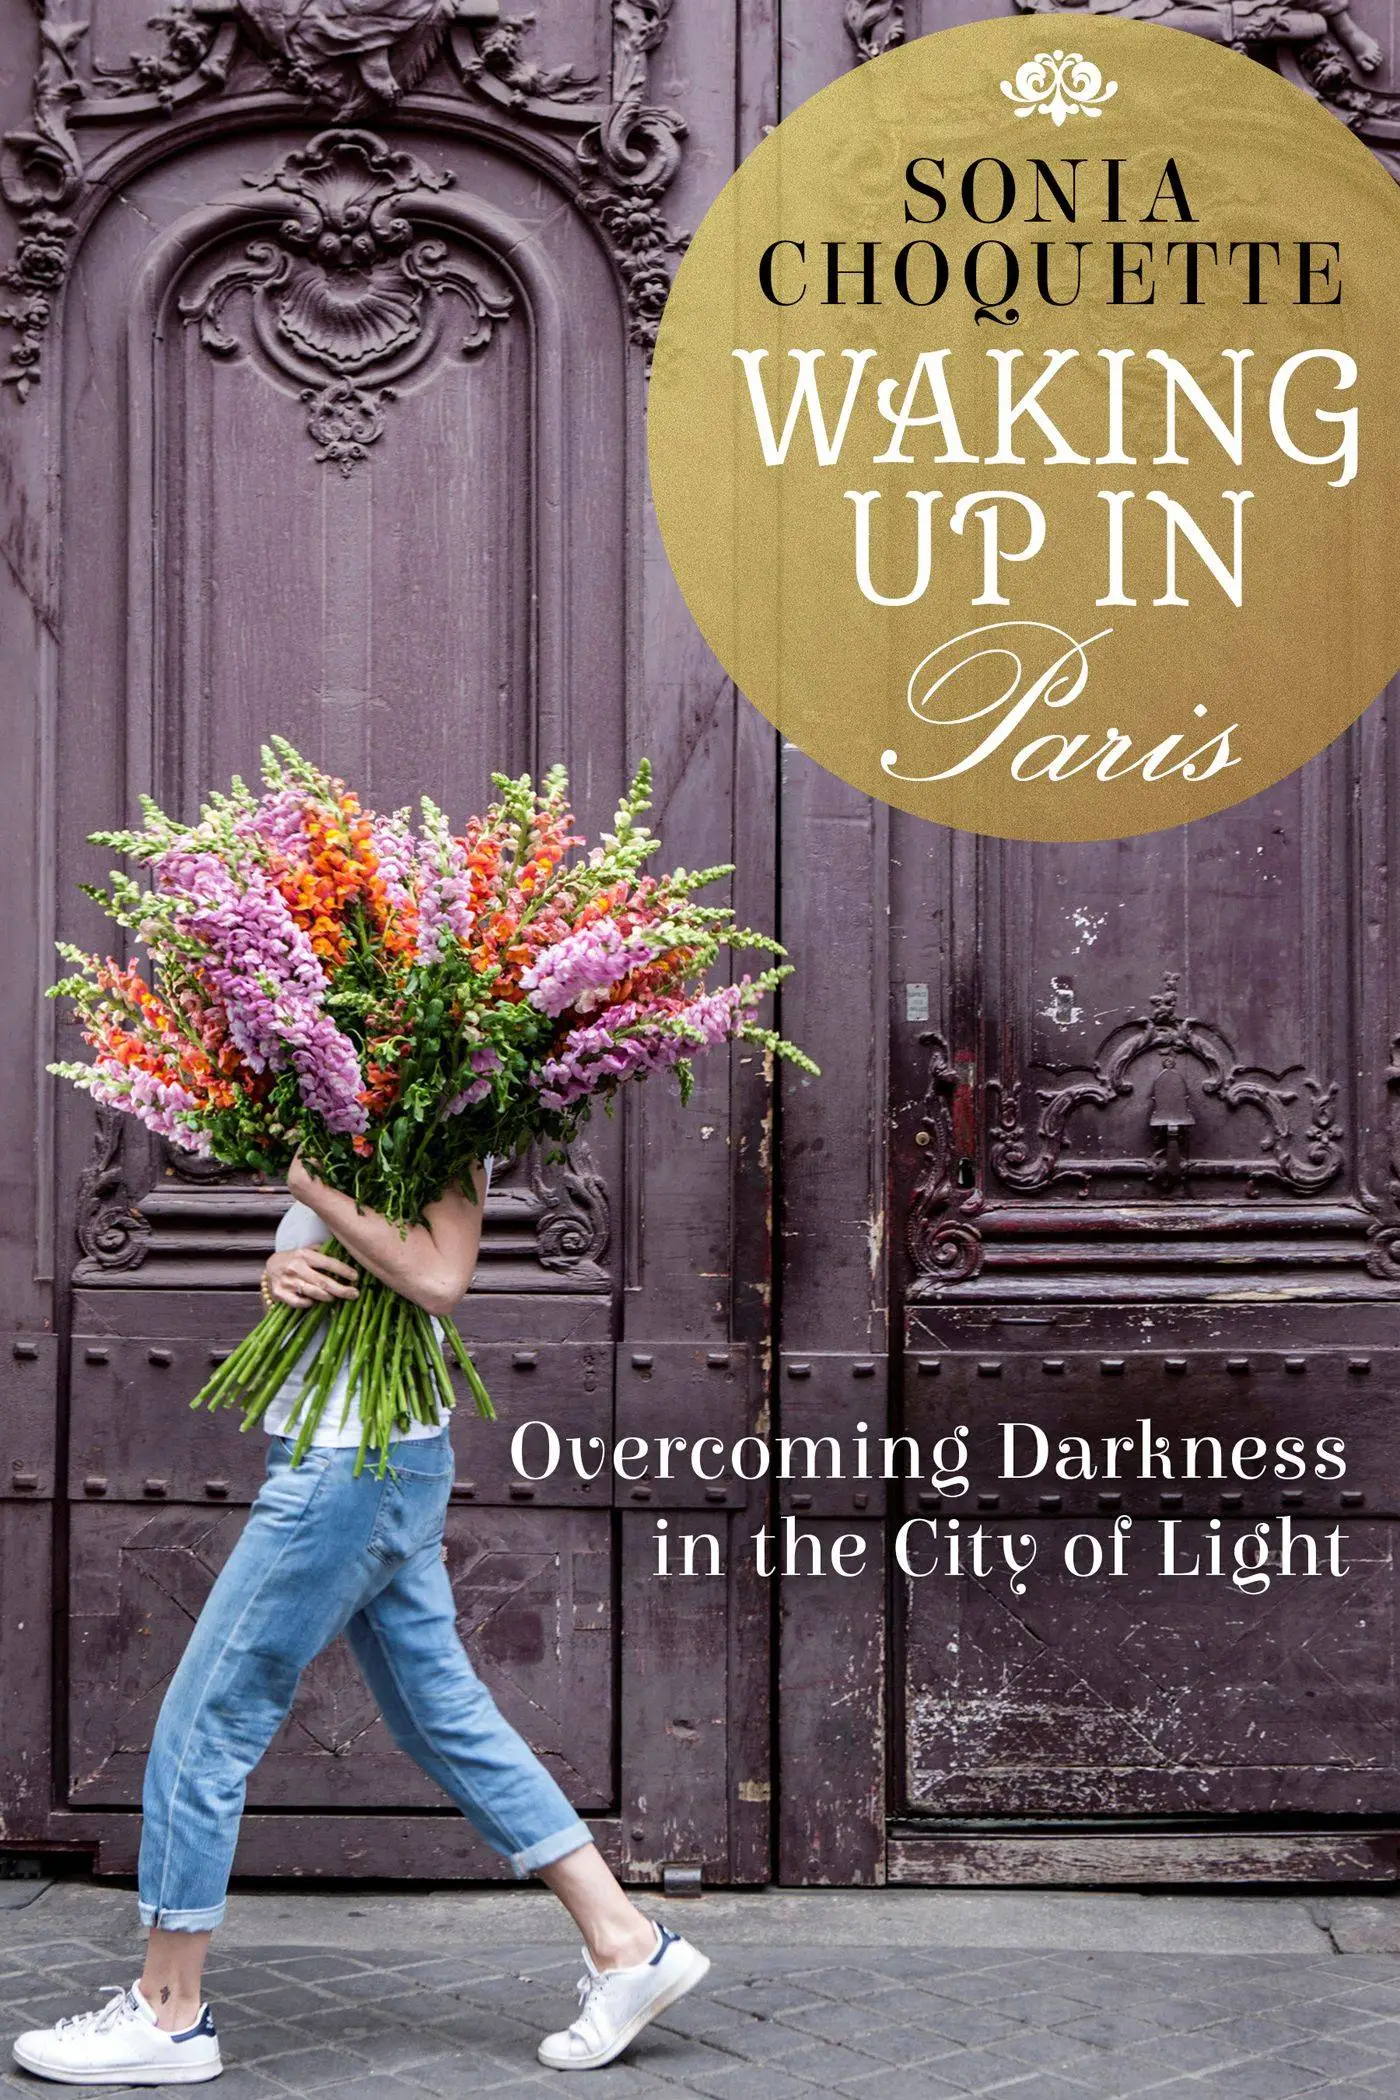 Waking-Up-in-Paris-Overcoming-Darkness-in-the-City-of-Light